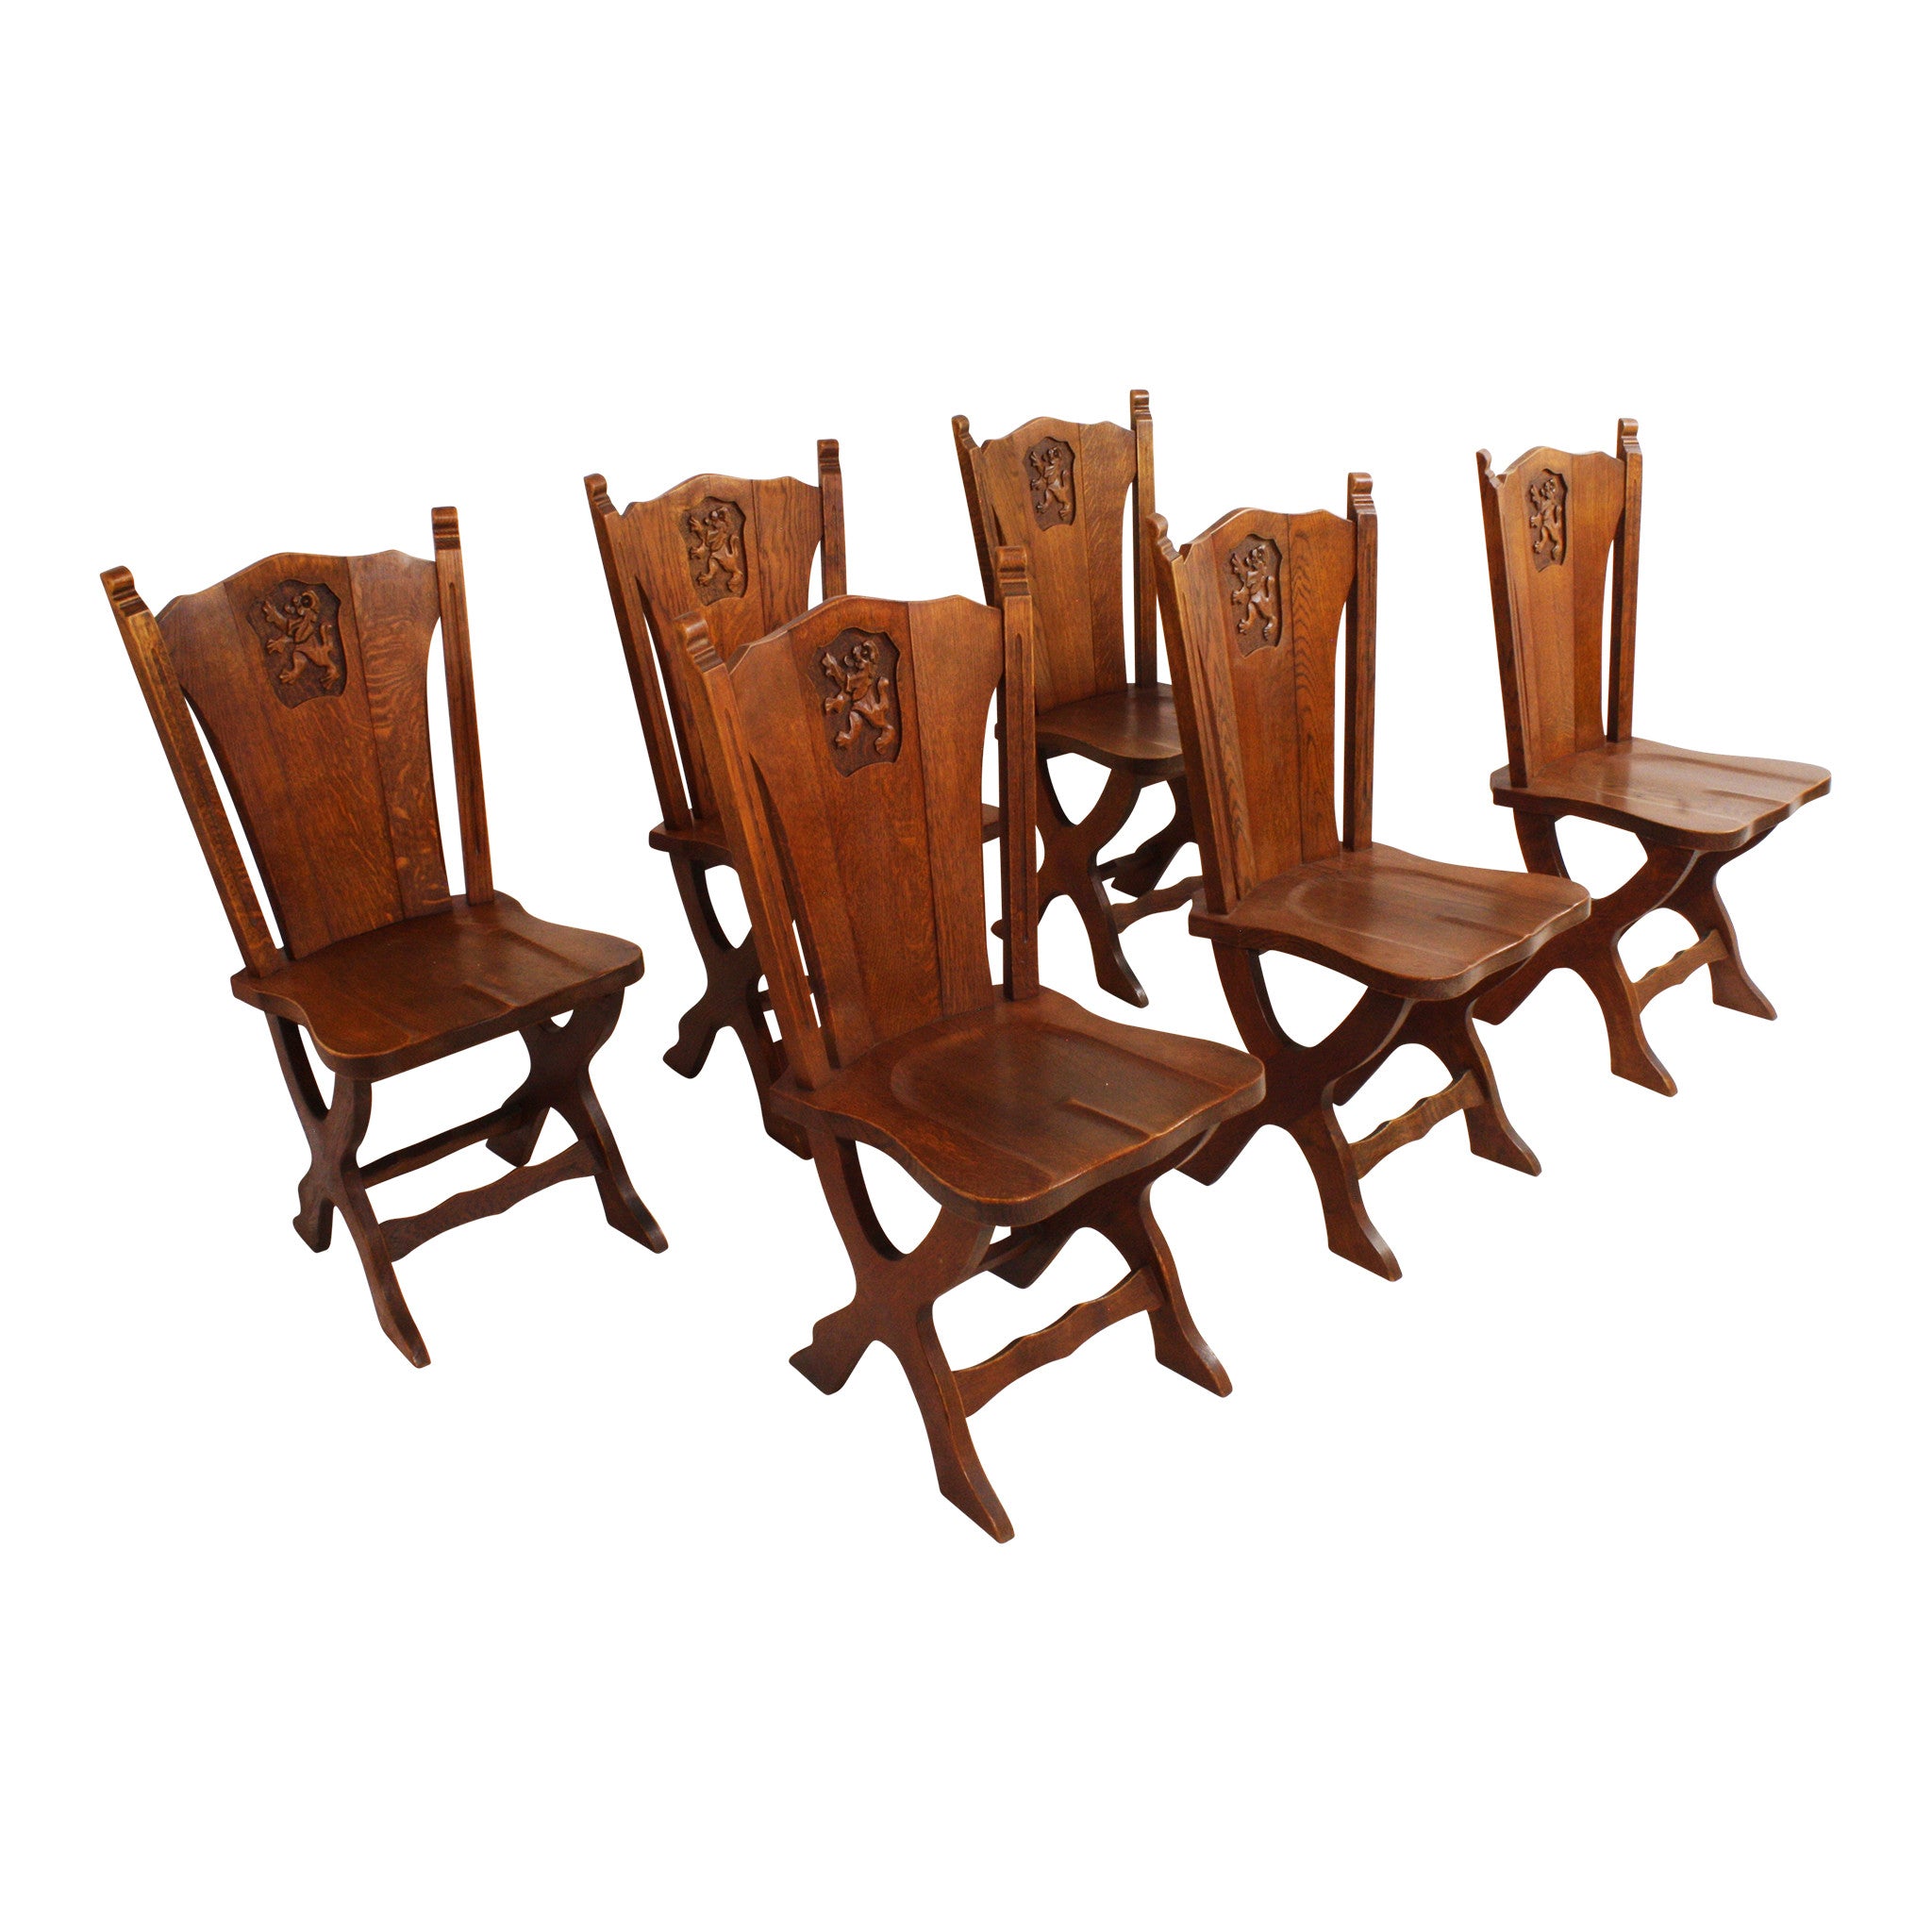 ski-country-antiques - Mountain Lodge Chairs - Set of 6